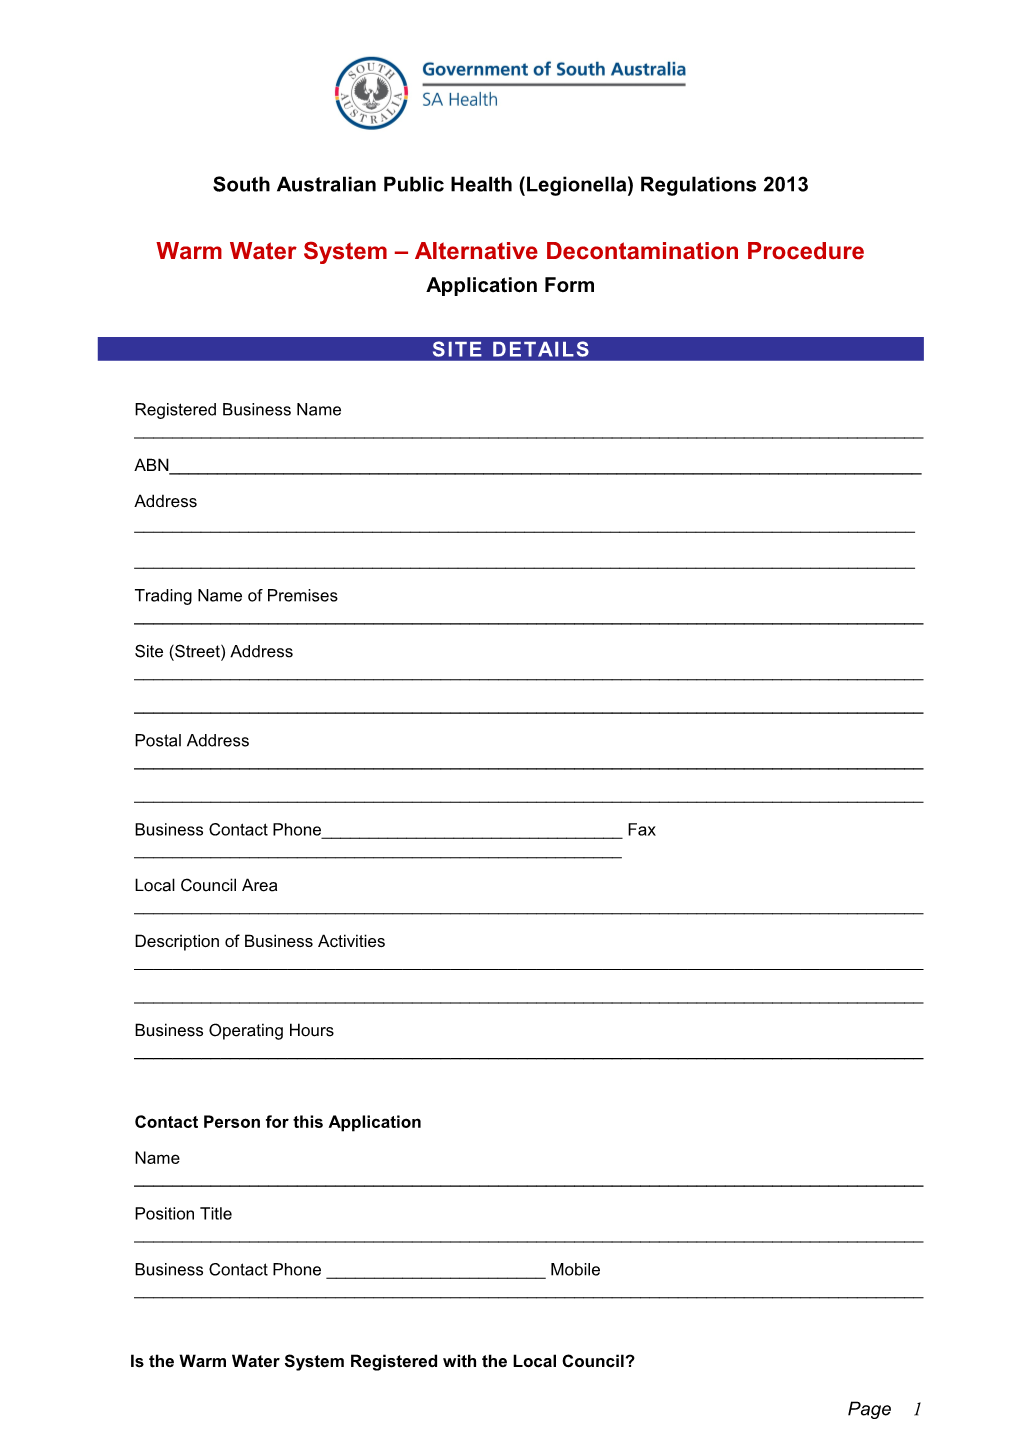 Alternative Decontamination Procedure for Warm Water Systems Application Form